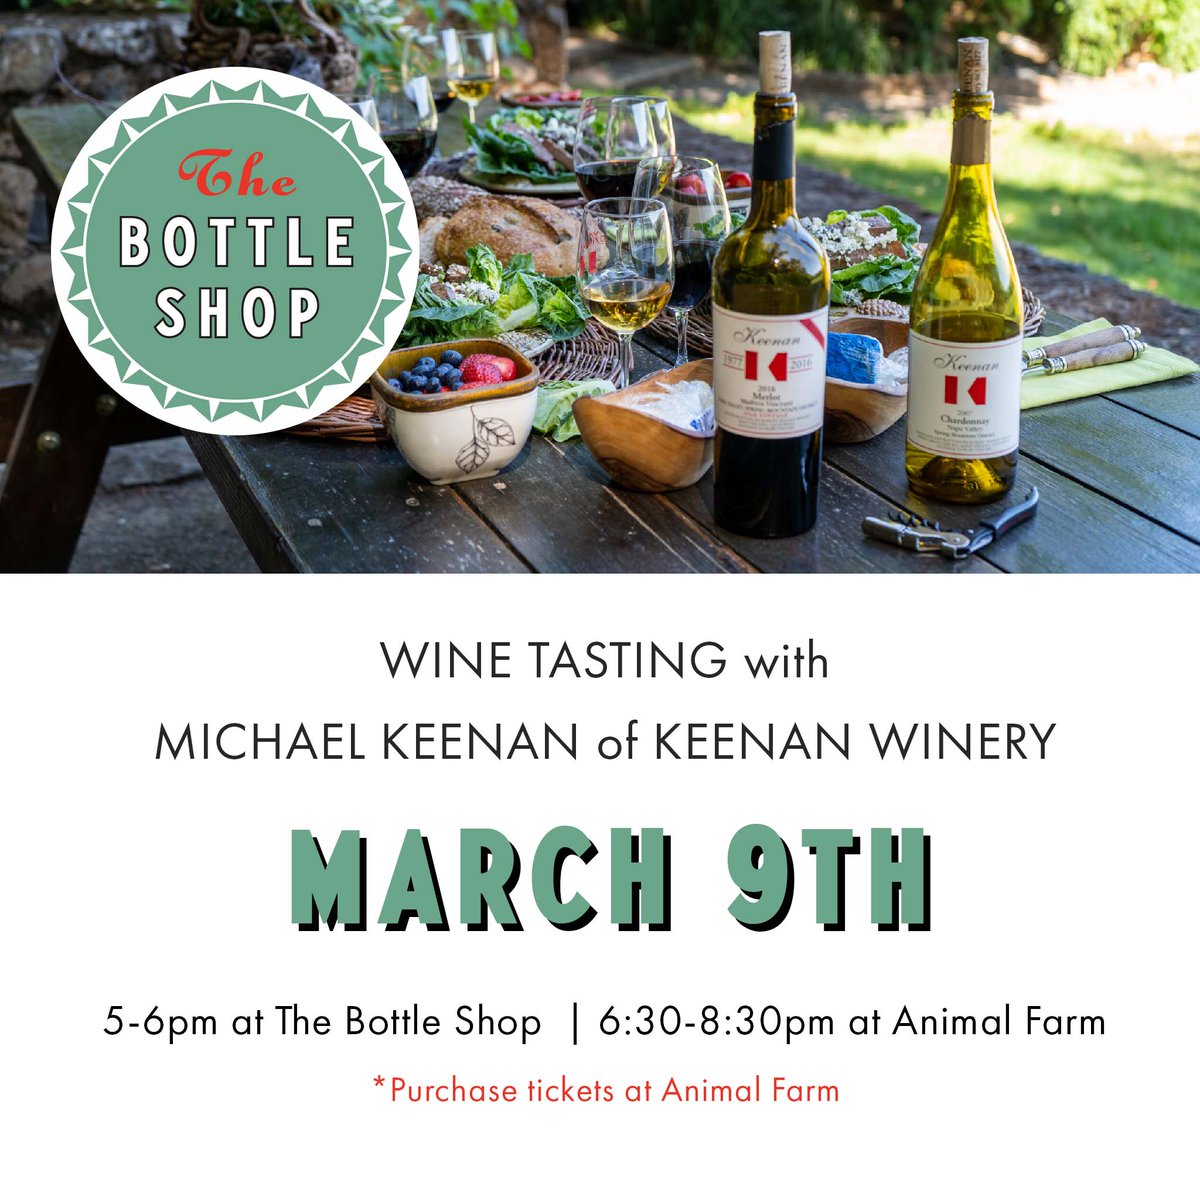 Please join us at the store on March 9th to sample some @KeenanWinery wines with Michael Keenan. If you can't make it to the store, come try the wines at The Animal Farm that night with appetizers. ***The Animal Farm portion is a ticketed event. Tickets can be purchased with them